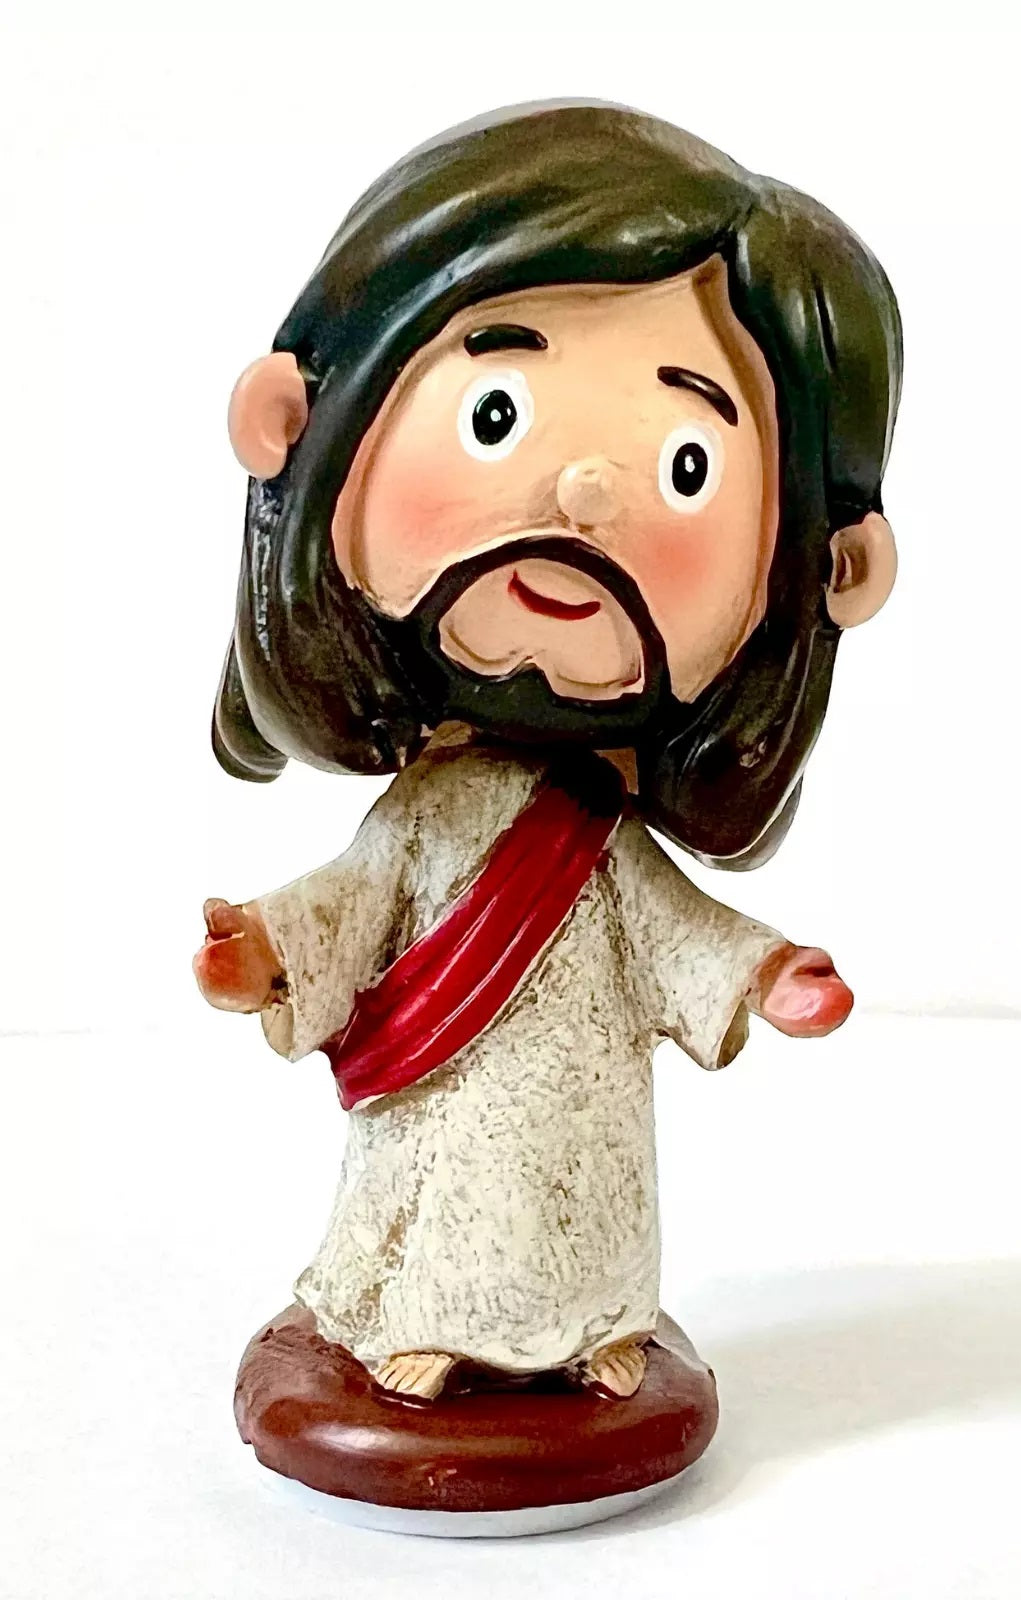 Bobble Head Jesus - Now You Can Stick Your Jesus on Your Desk or Dashboard!